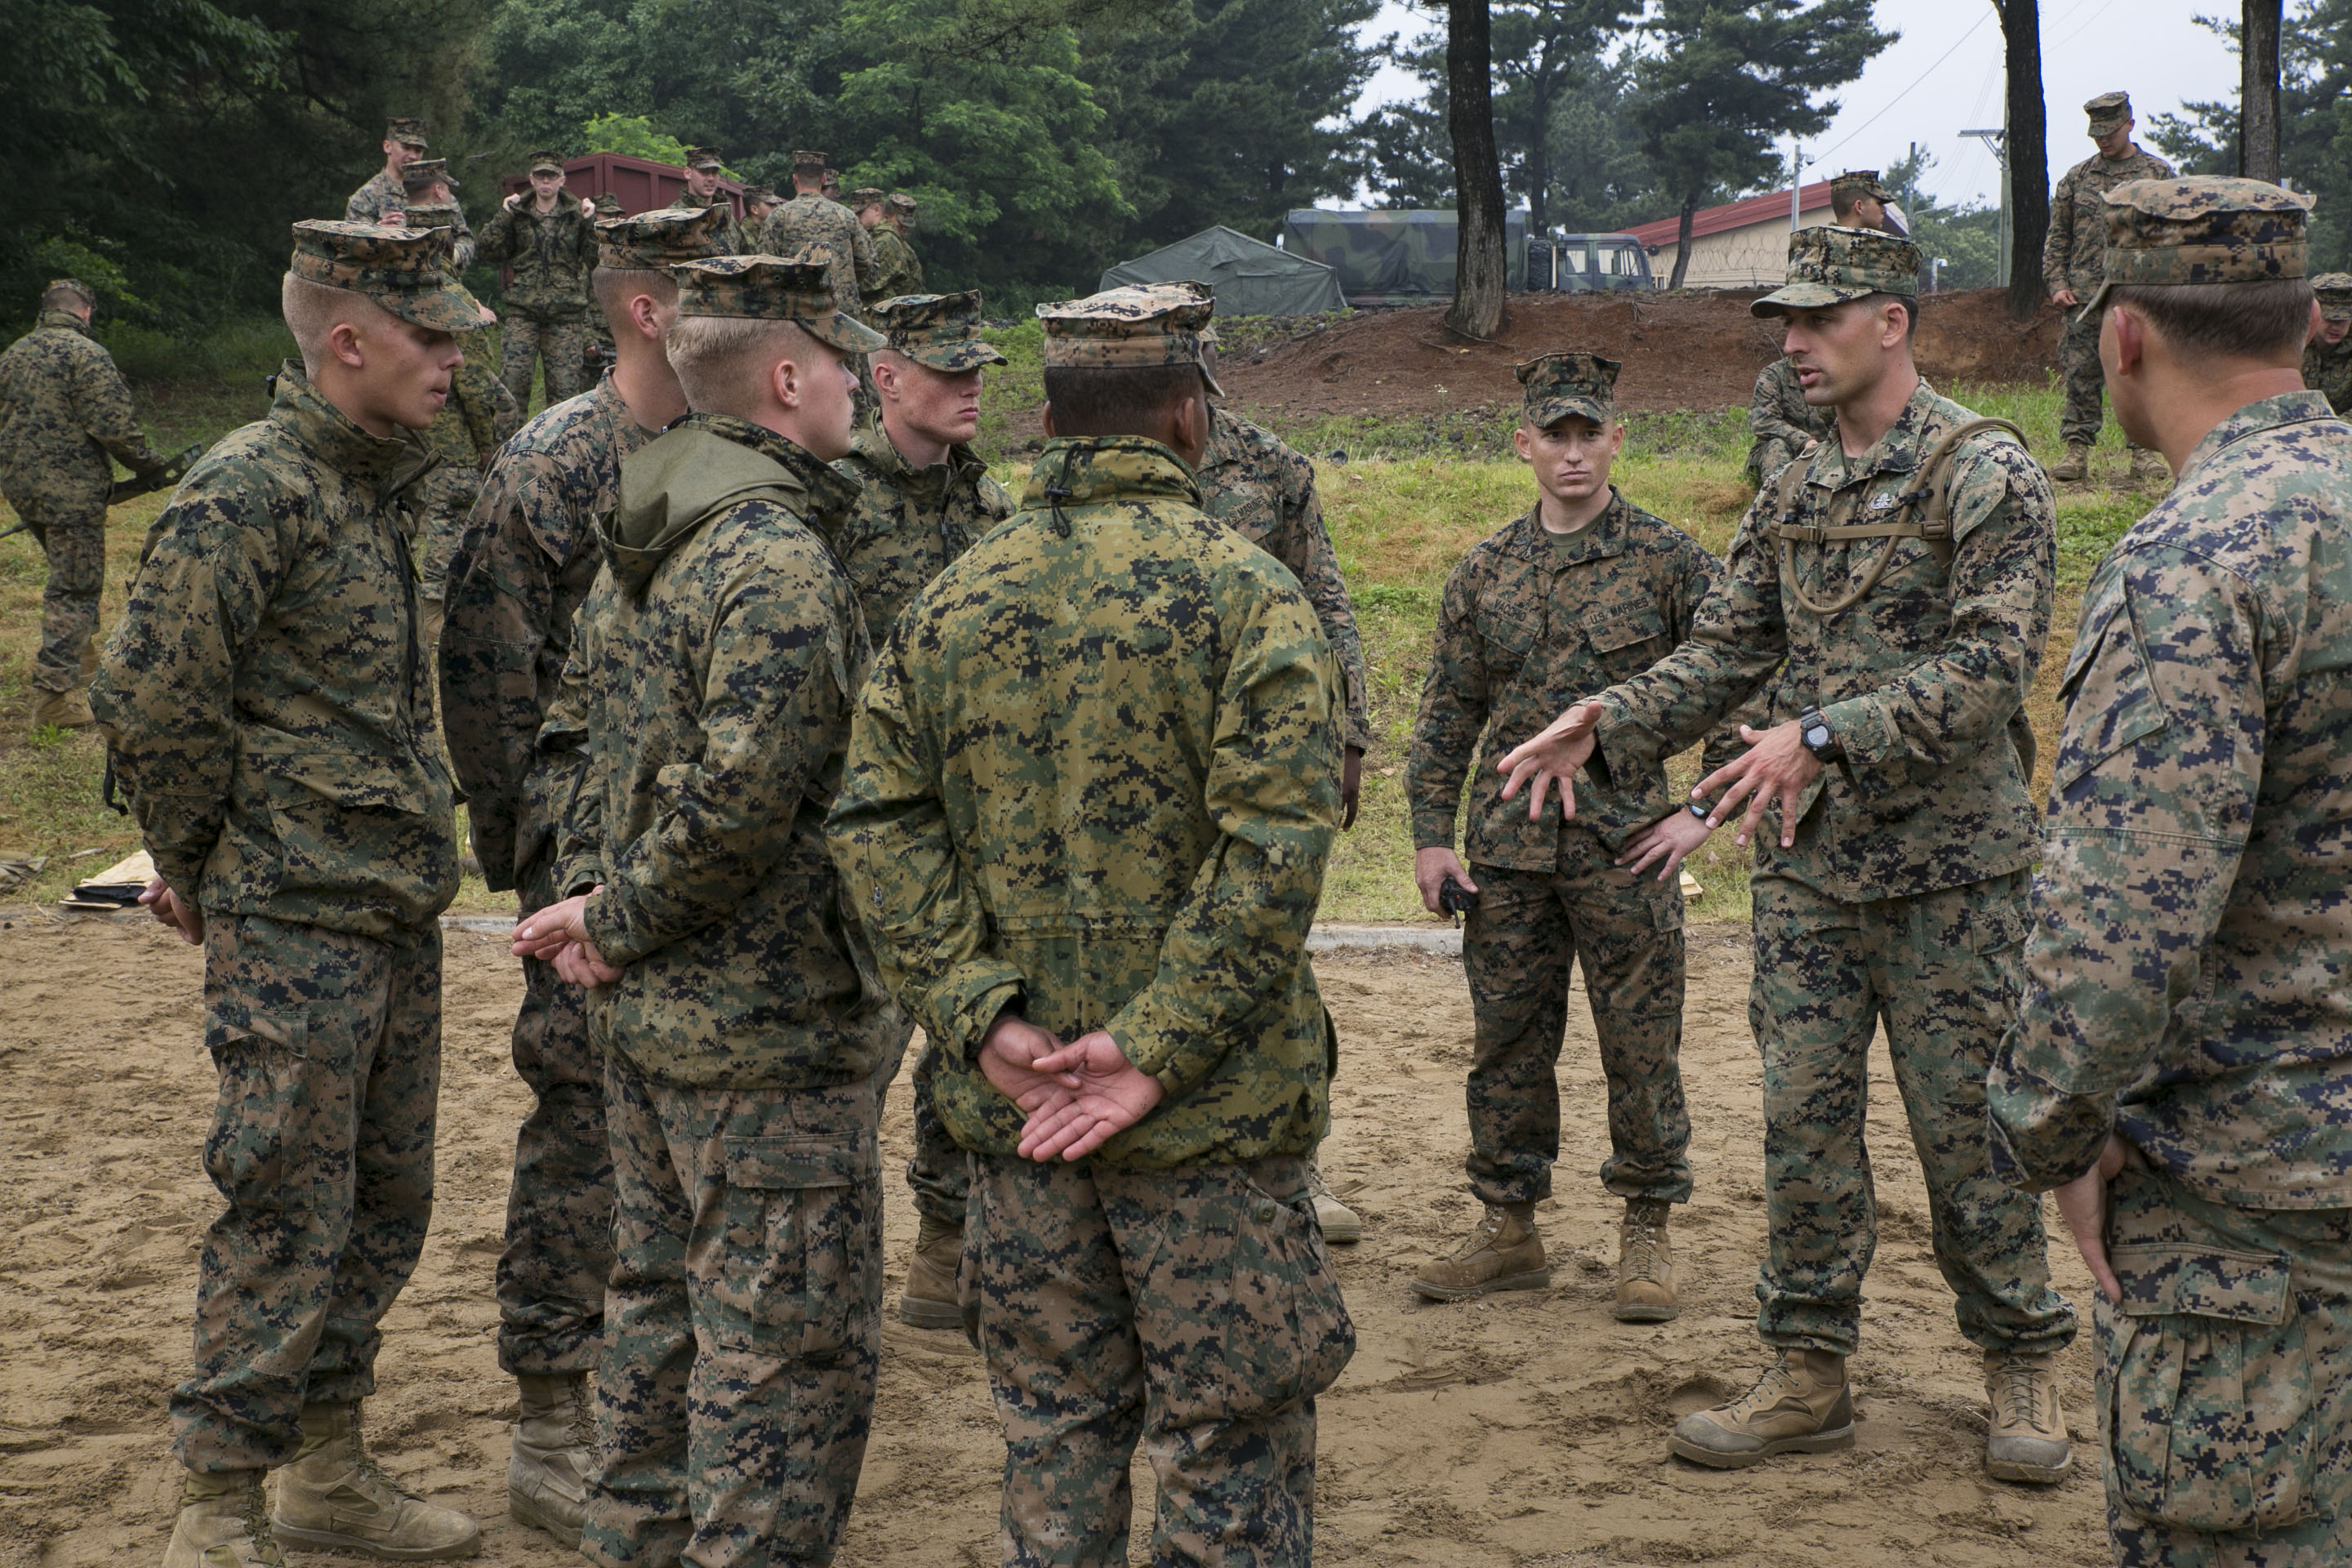 IED lanes prepare Marines for future conflict > Okinawa Marines > News